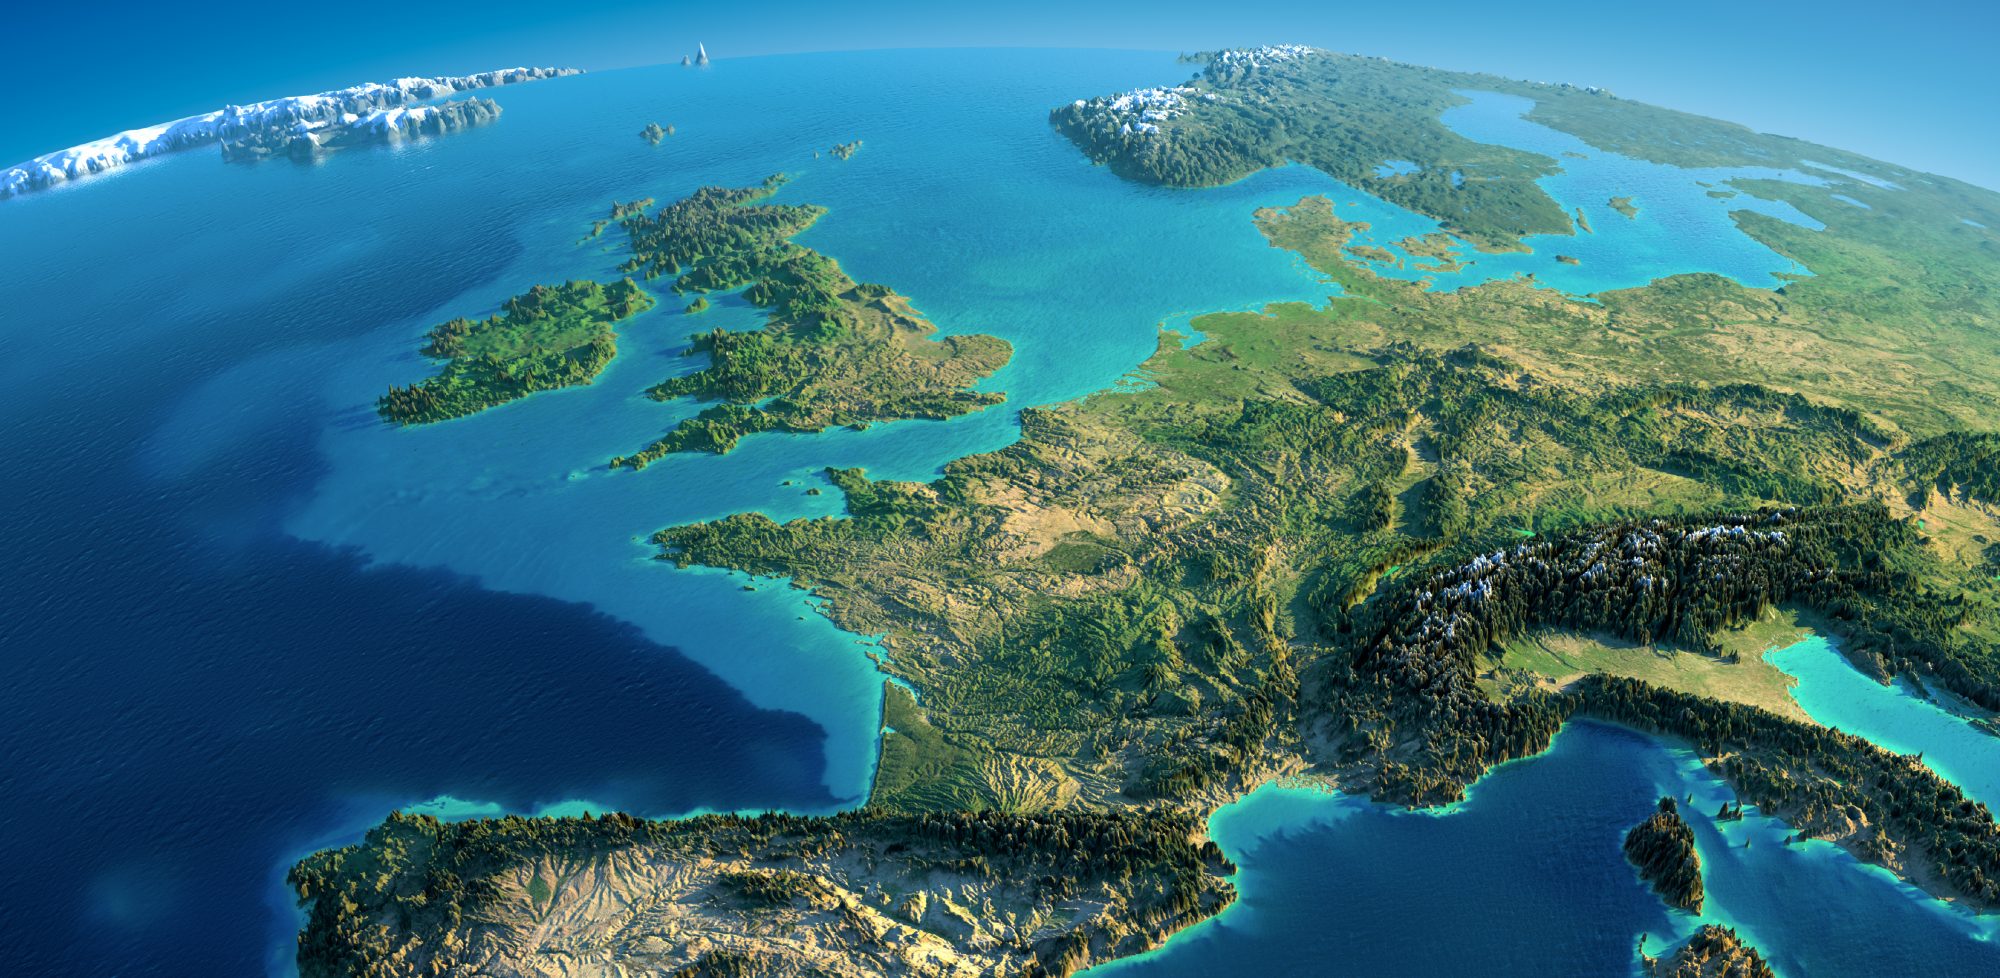 Graphic design relief map of Europe